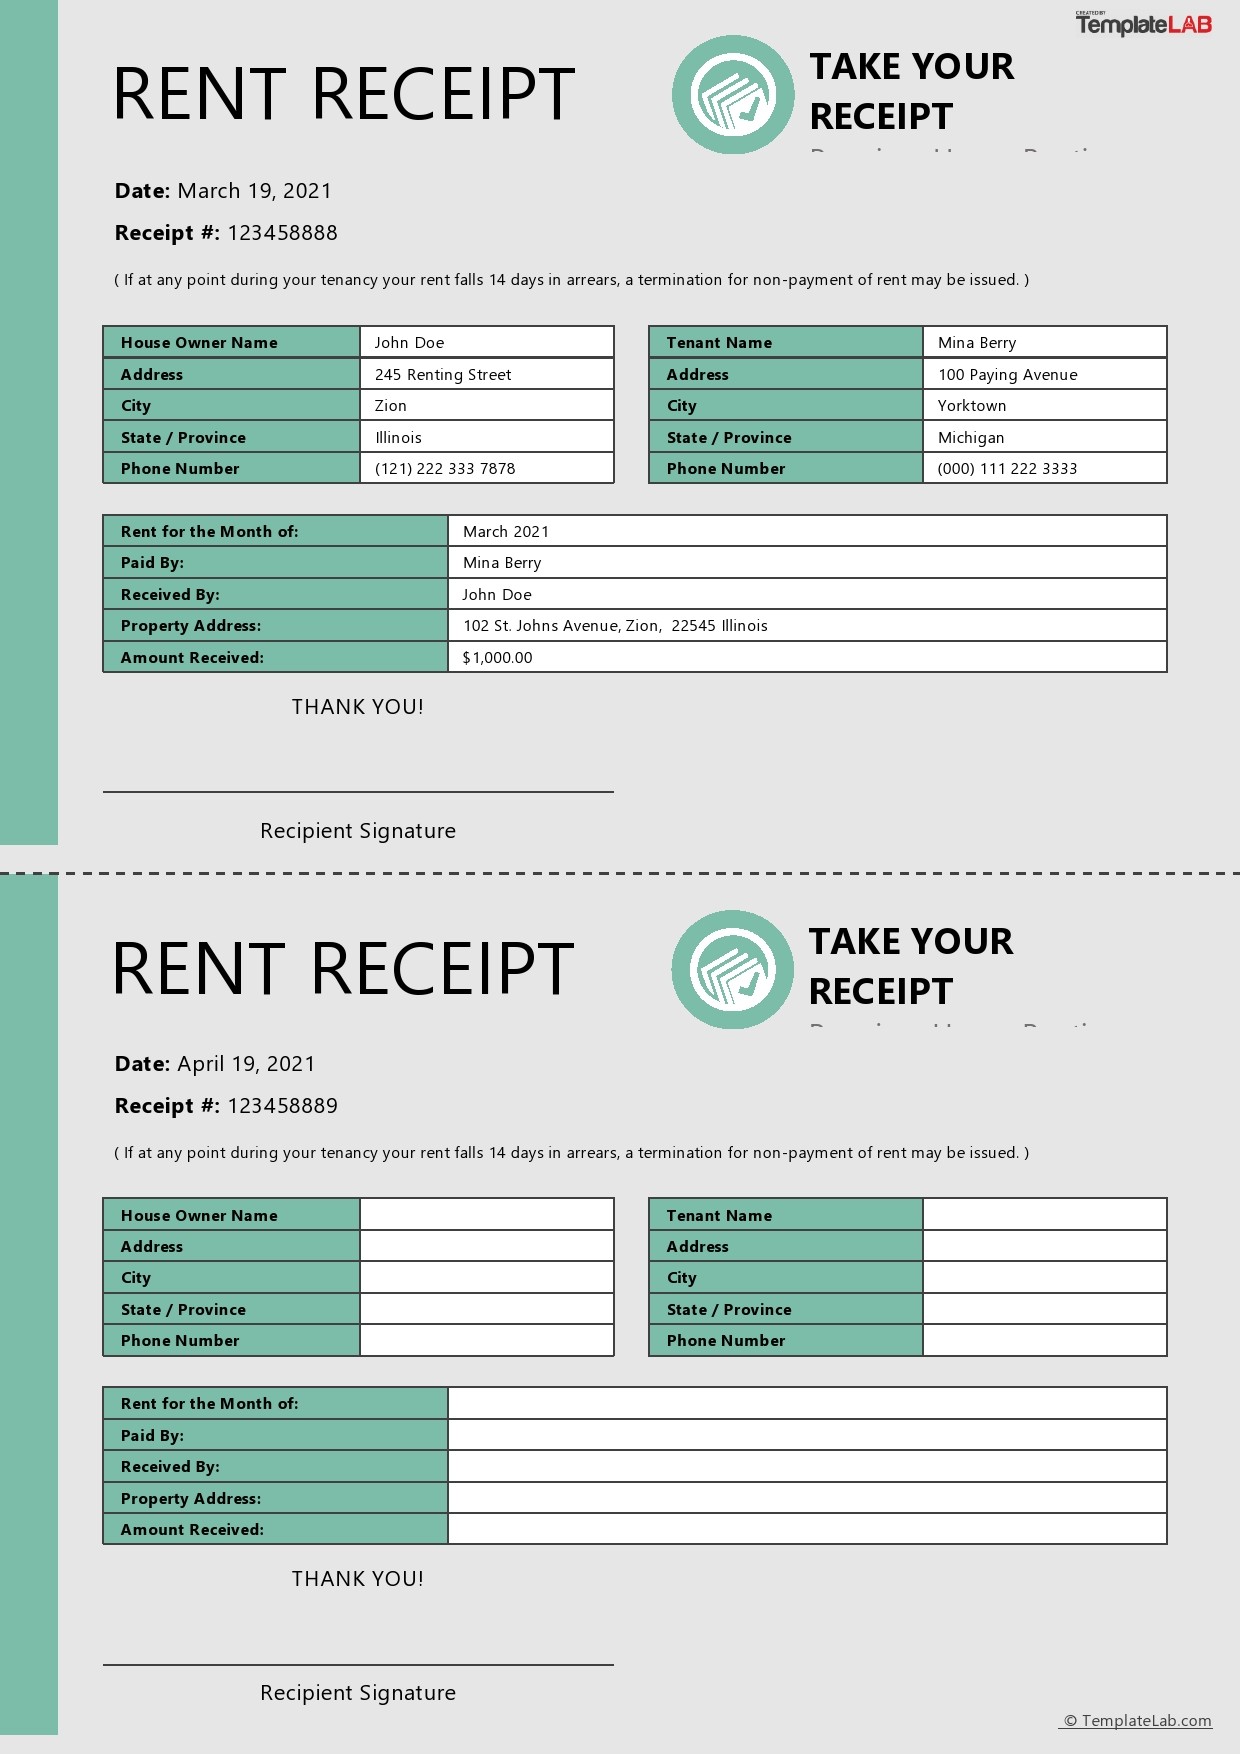 Where Can I Use A Rent Receipt Template